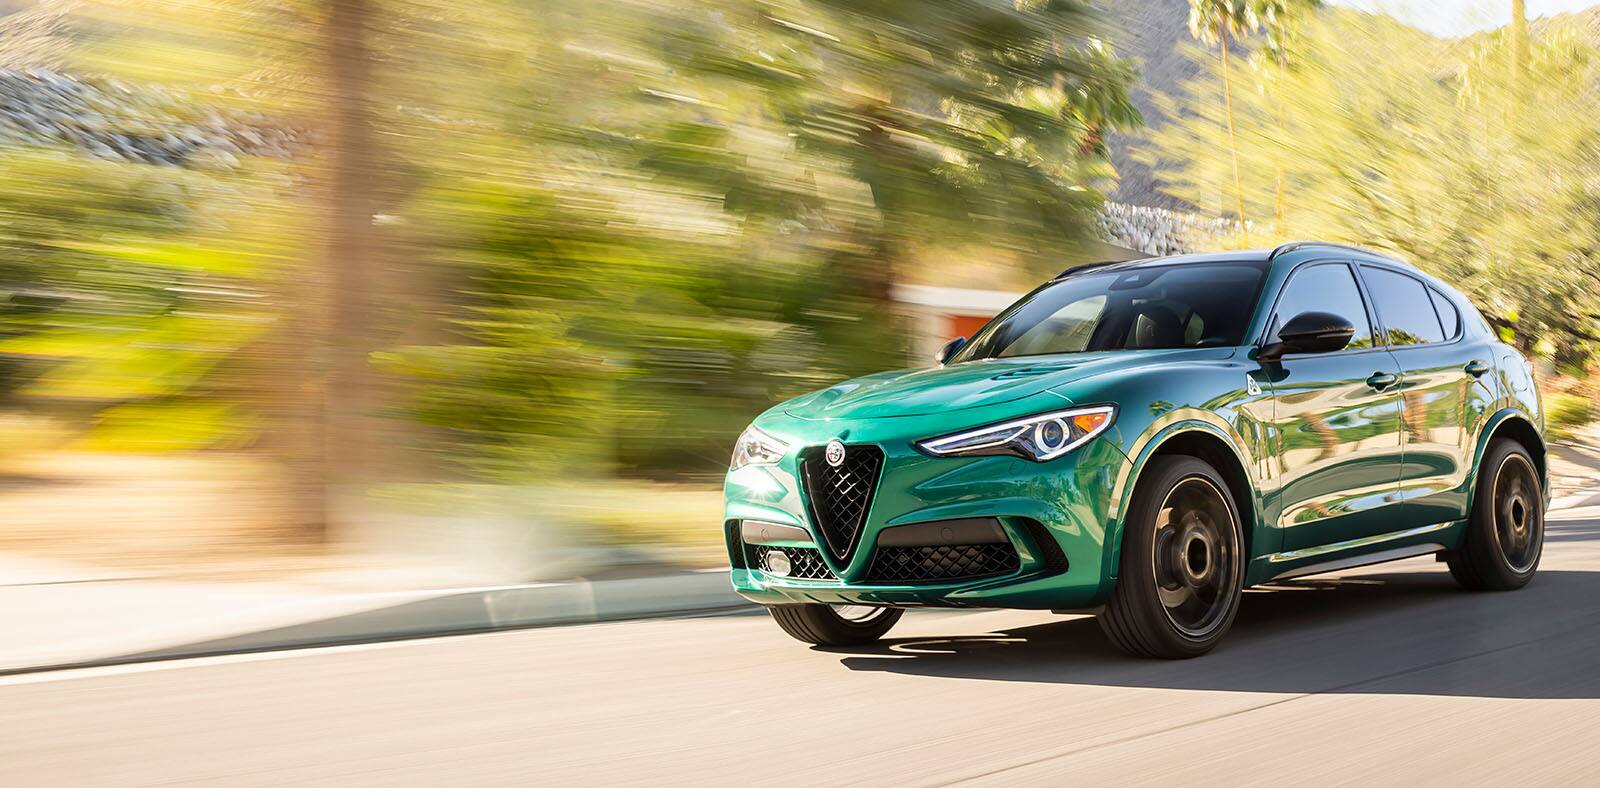 A green 2023 Alfa Romeo Stelvio Quadrifoglio being driven on a street with mountains in the distance, the background is blurred to indicate the speed of the vehicle.